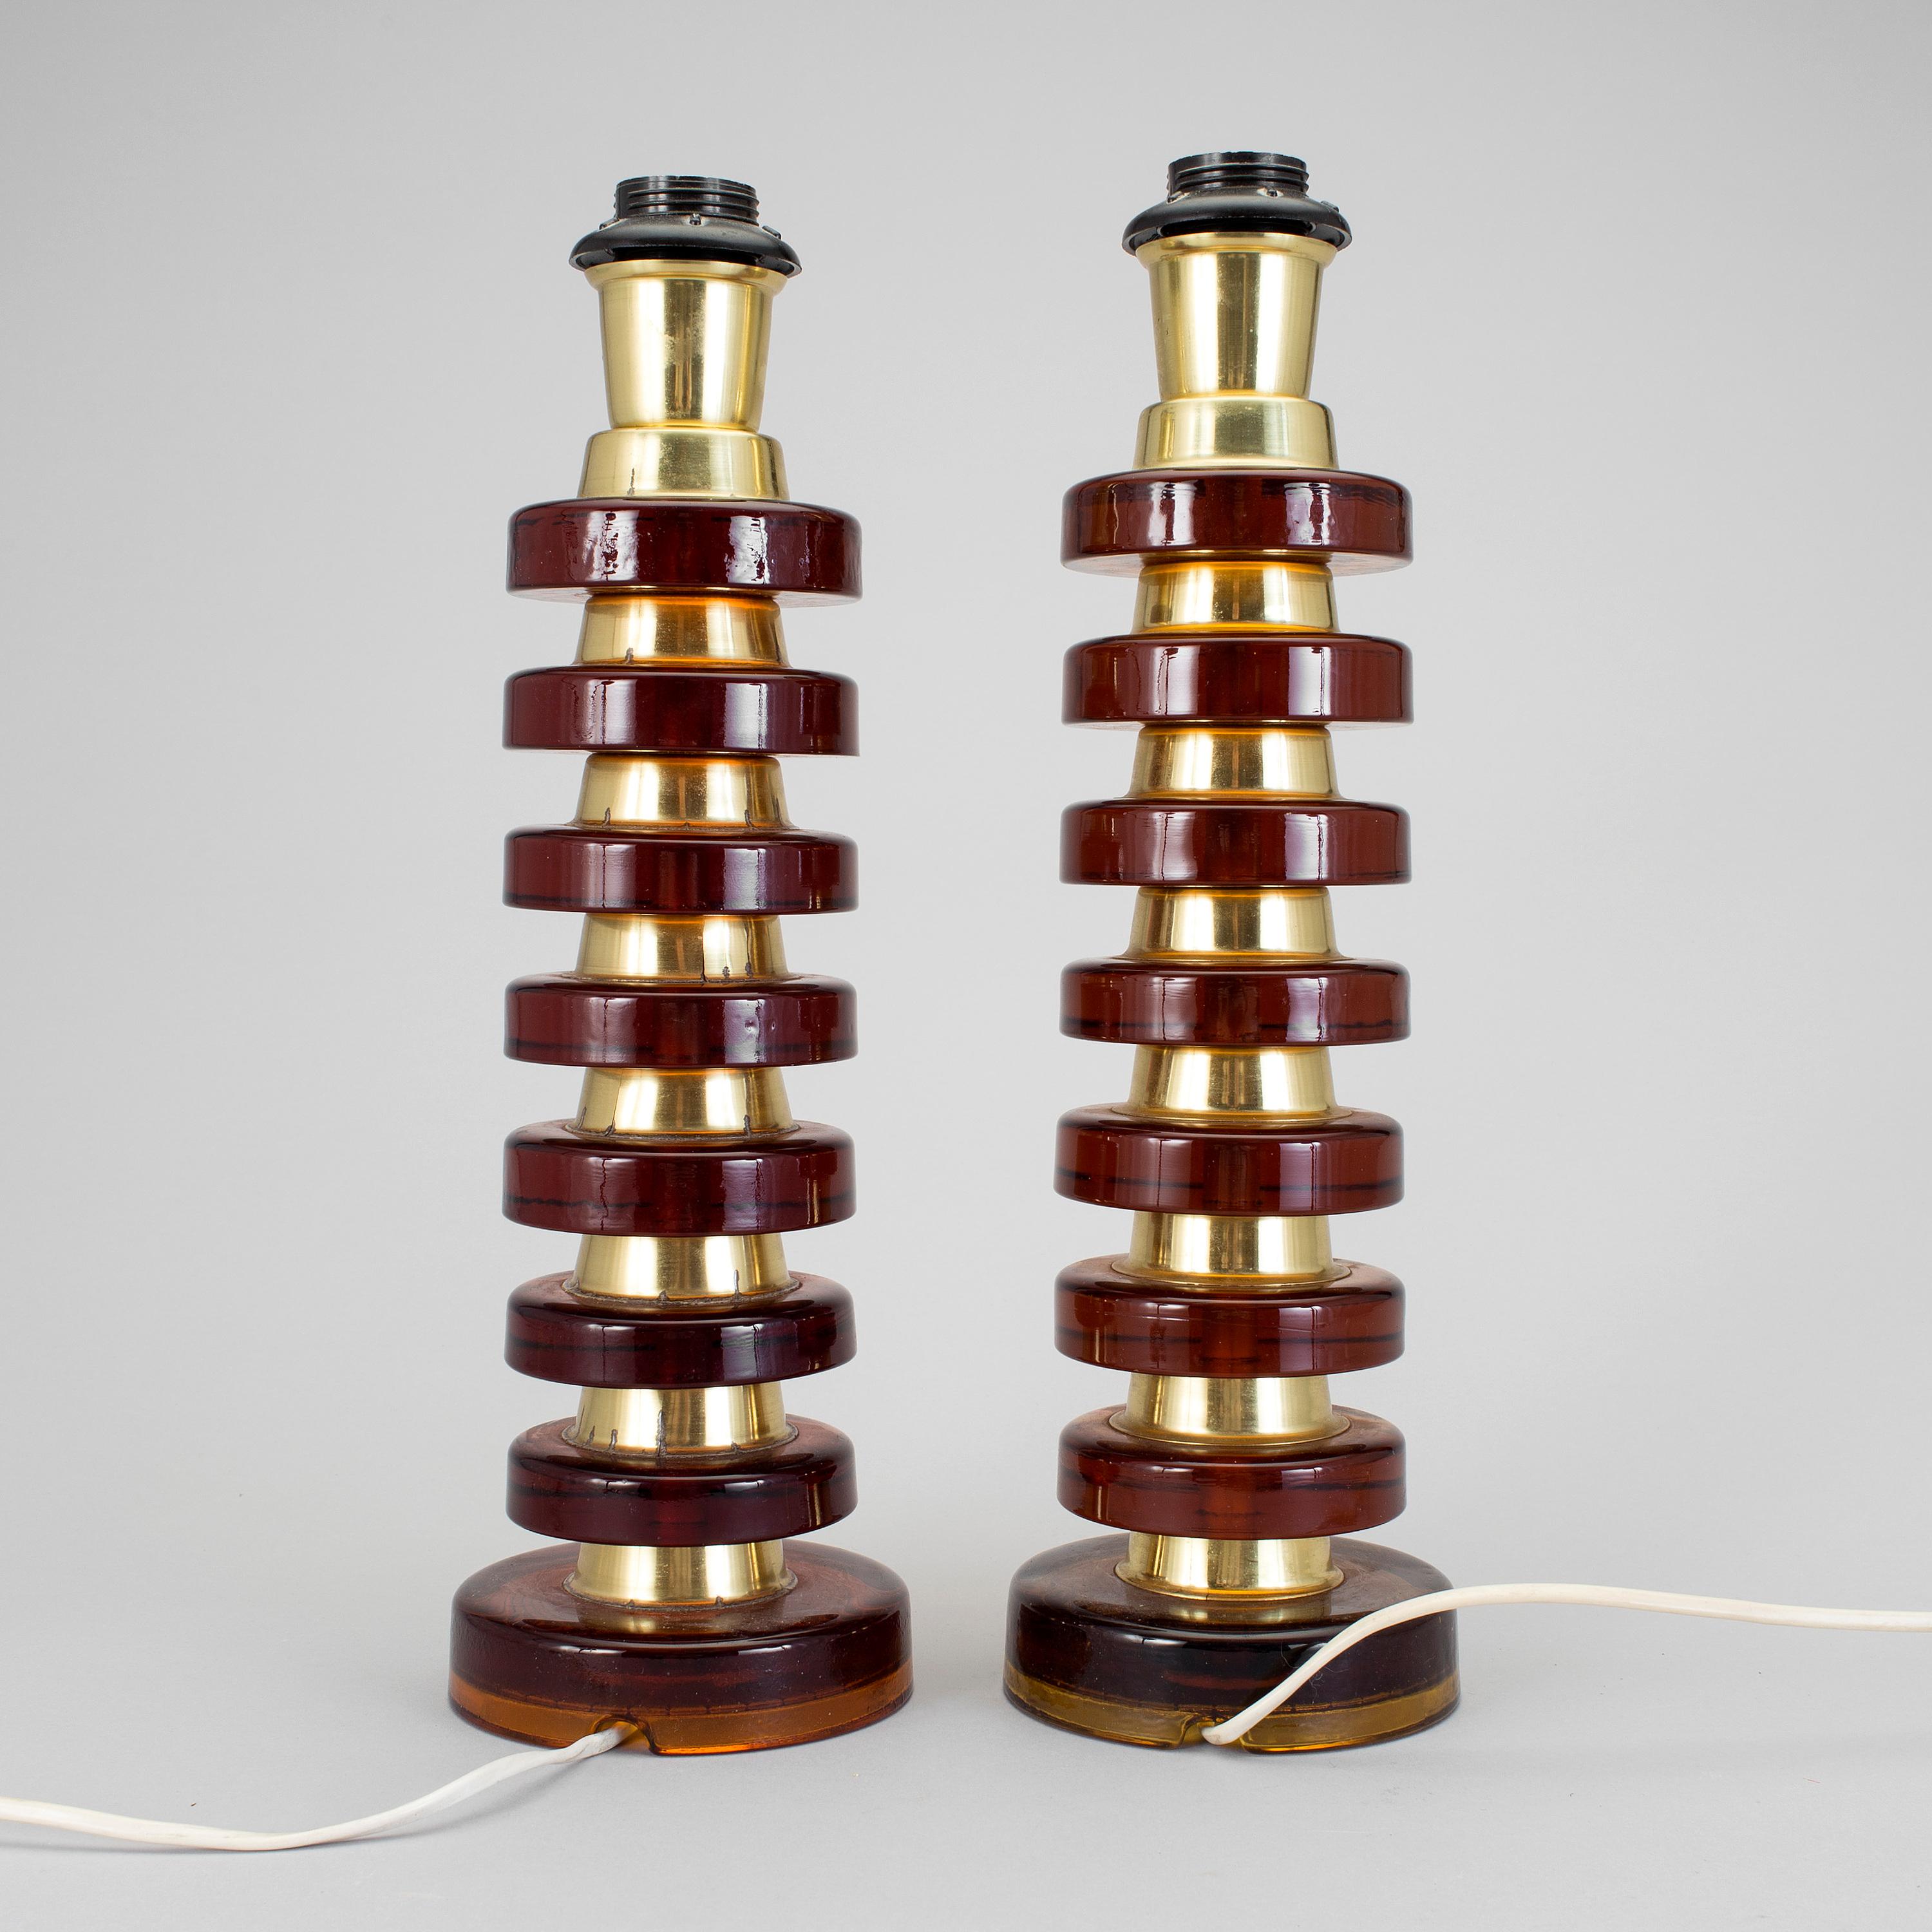 Scandinavian Modern Orrefors Table Lamps a Pair Amber Glass and Brass by Sweden, 1960 For Sale